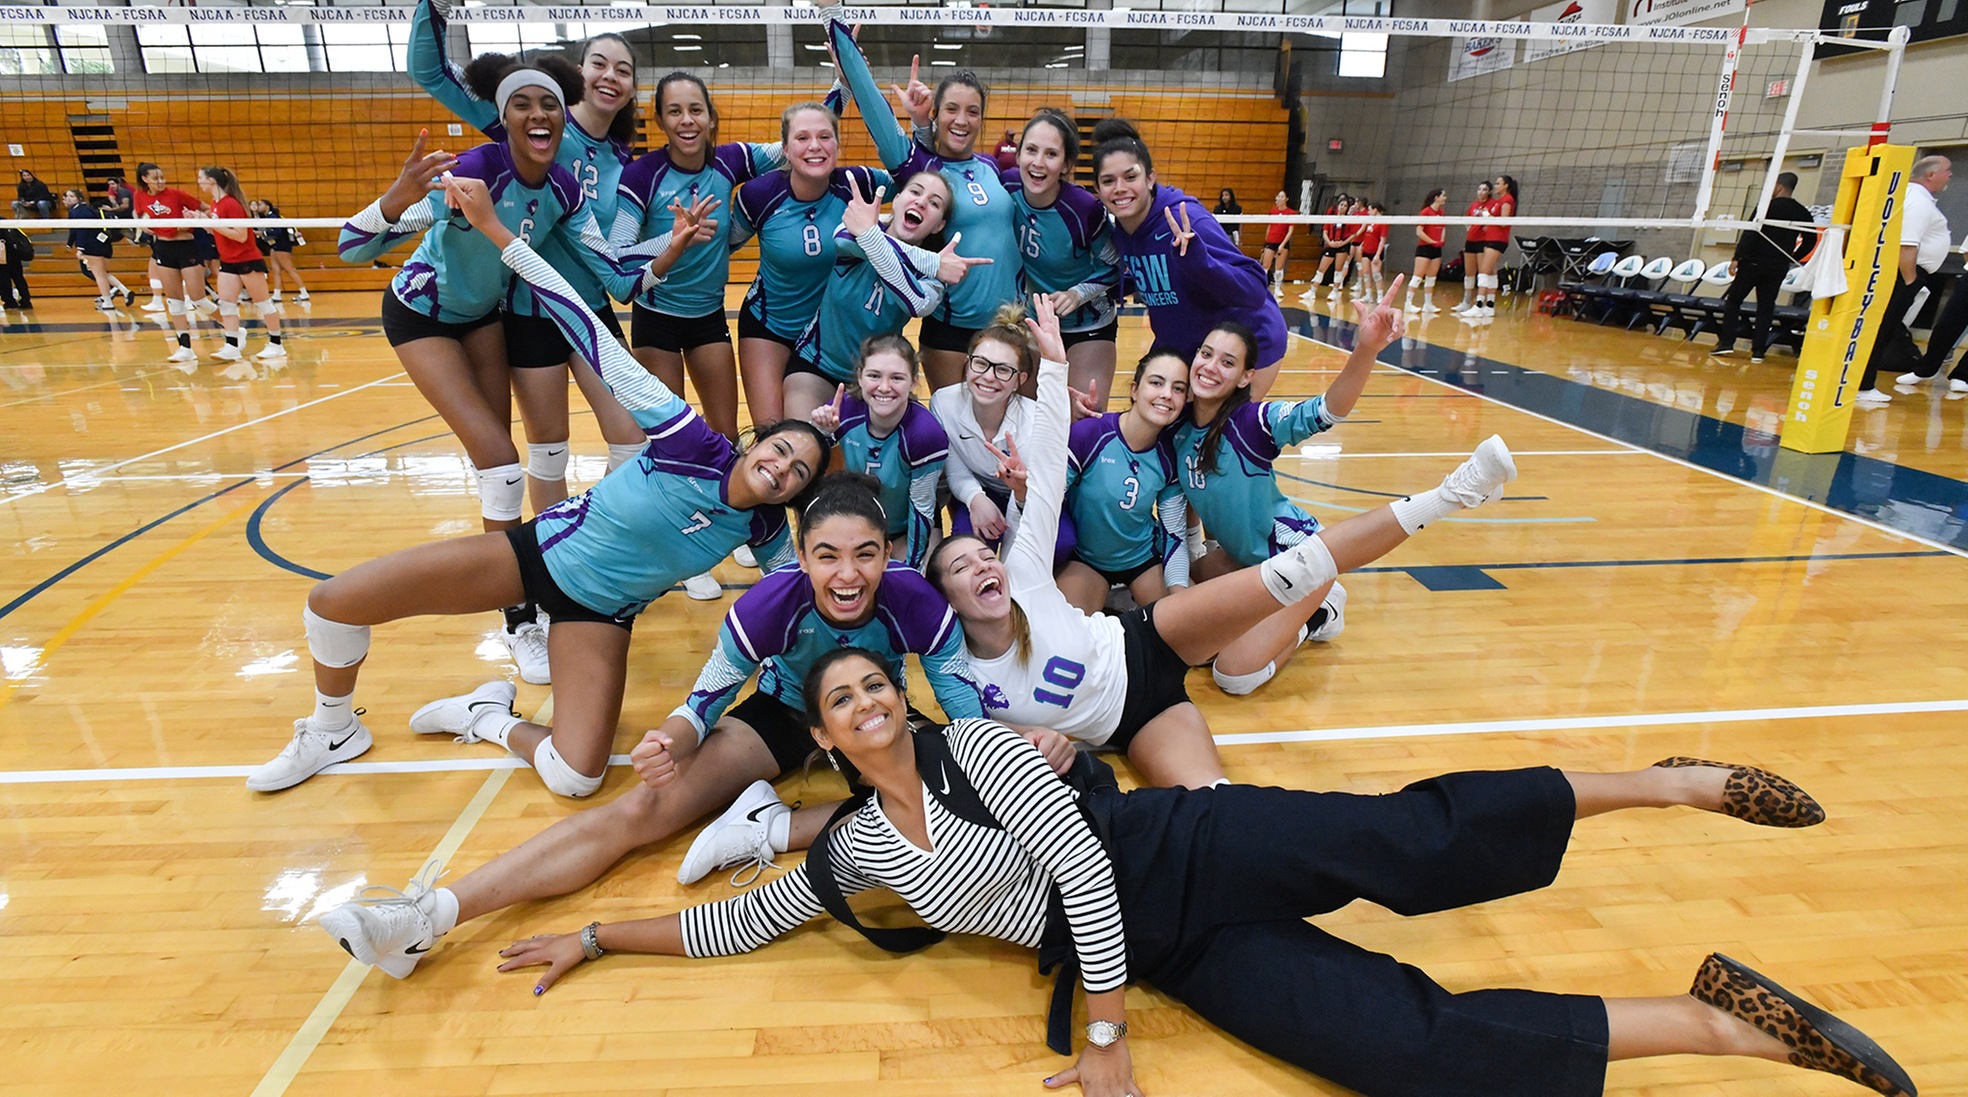 FSW celebrates their win over #14 Central Florida (Photo by Tom Haggerty)